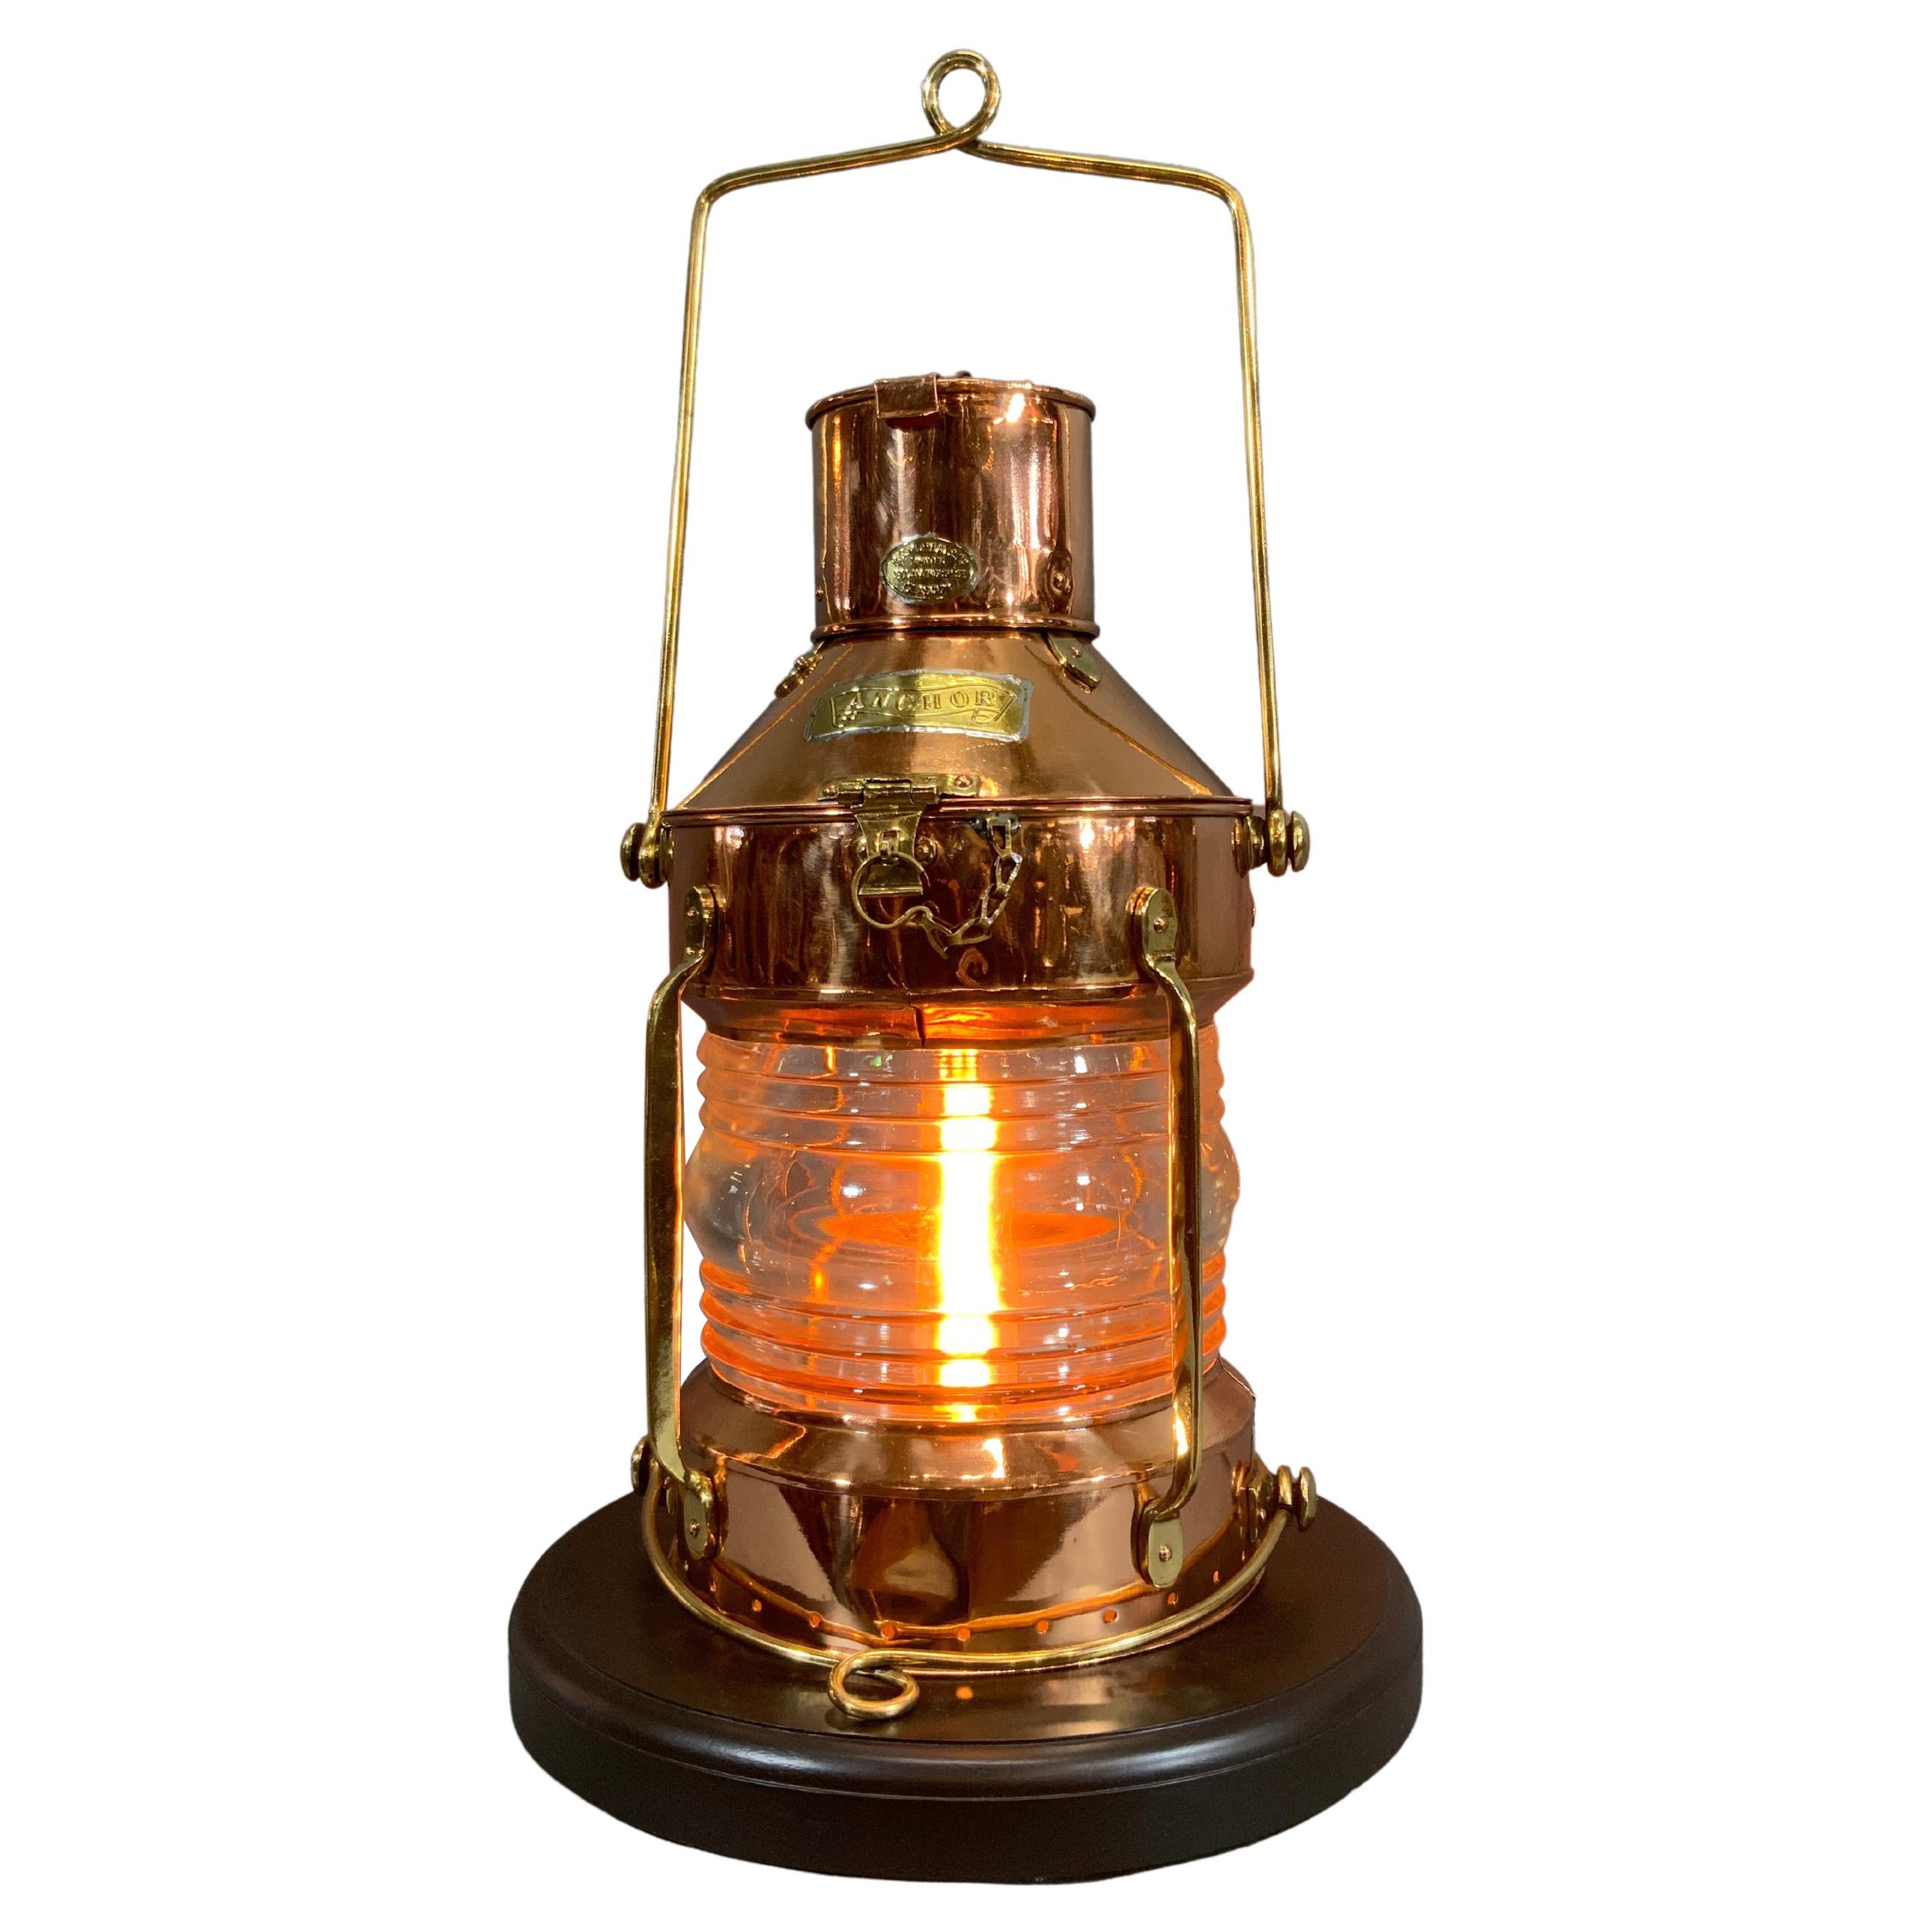 Ship's Copper Anchor Lantern from Early Twentieth Century by R.C. Murray